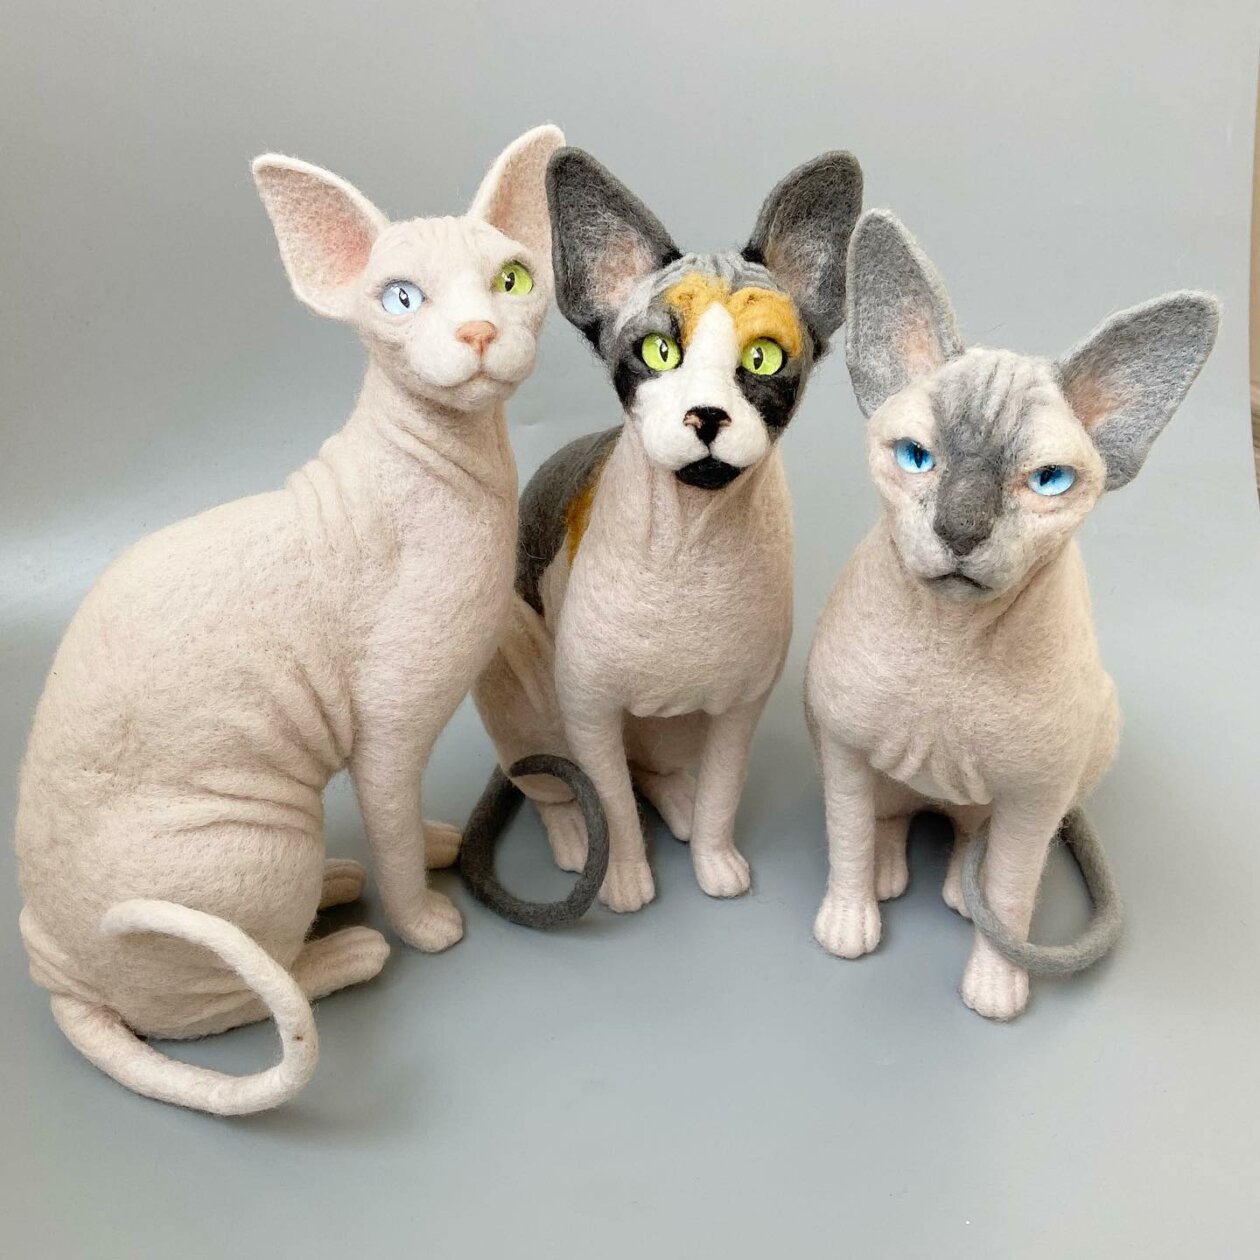 Hyper Realistic Animal Felted Wool Sculptures By Alla Rebrova (1)